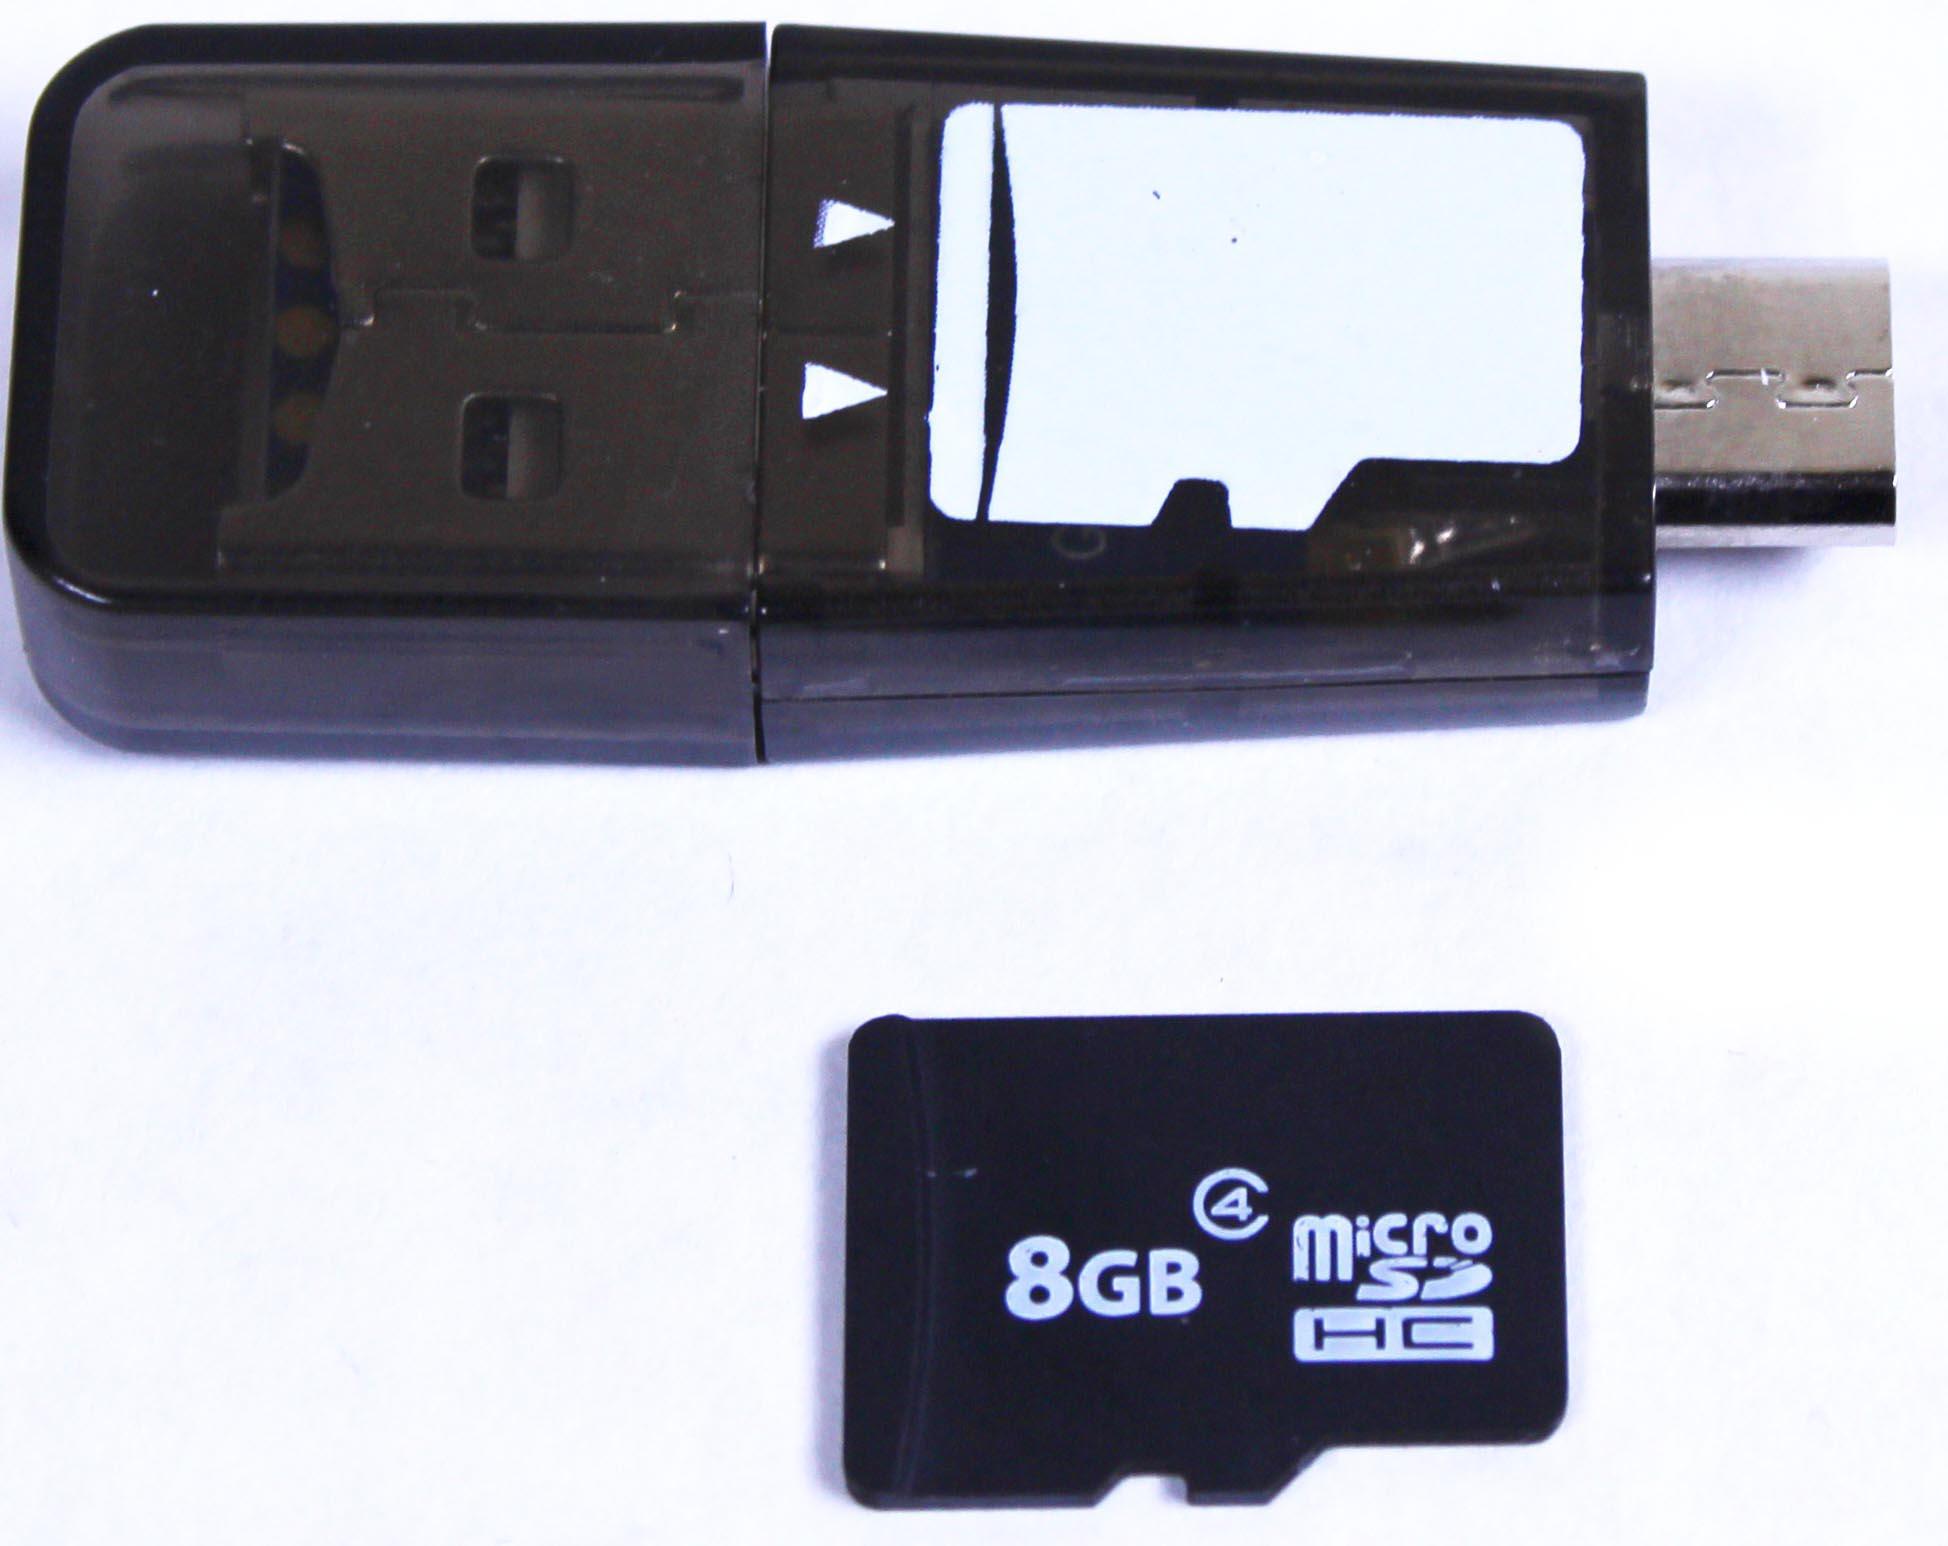 Plugable USB 2.0 MicroSD Card Reader for Phone, Laptop, and Tablet